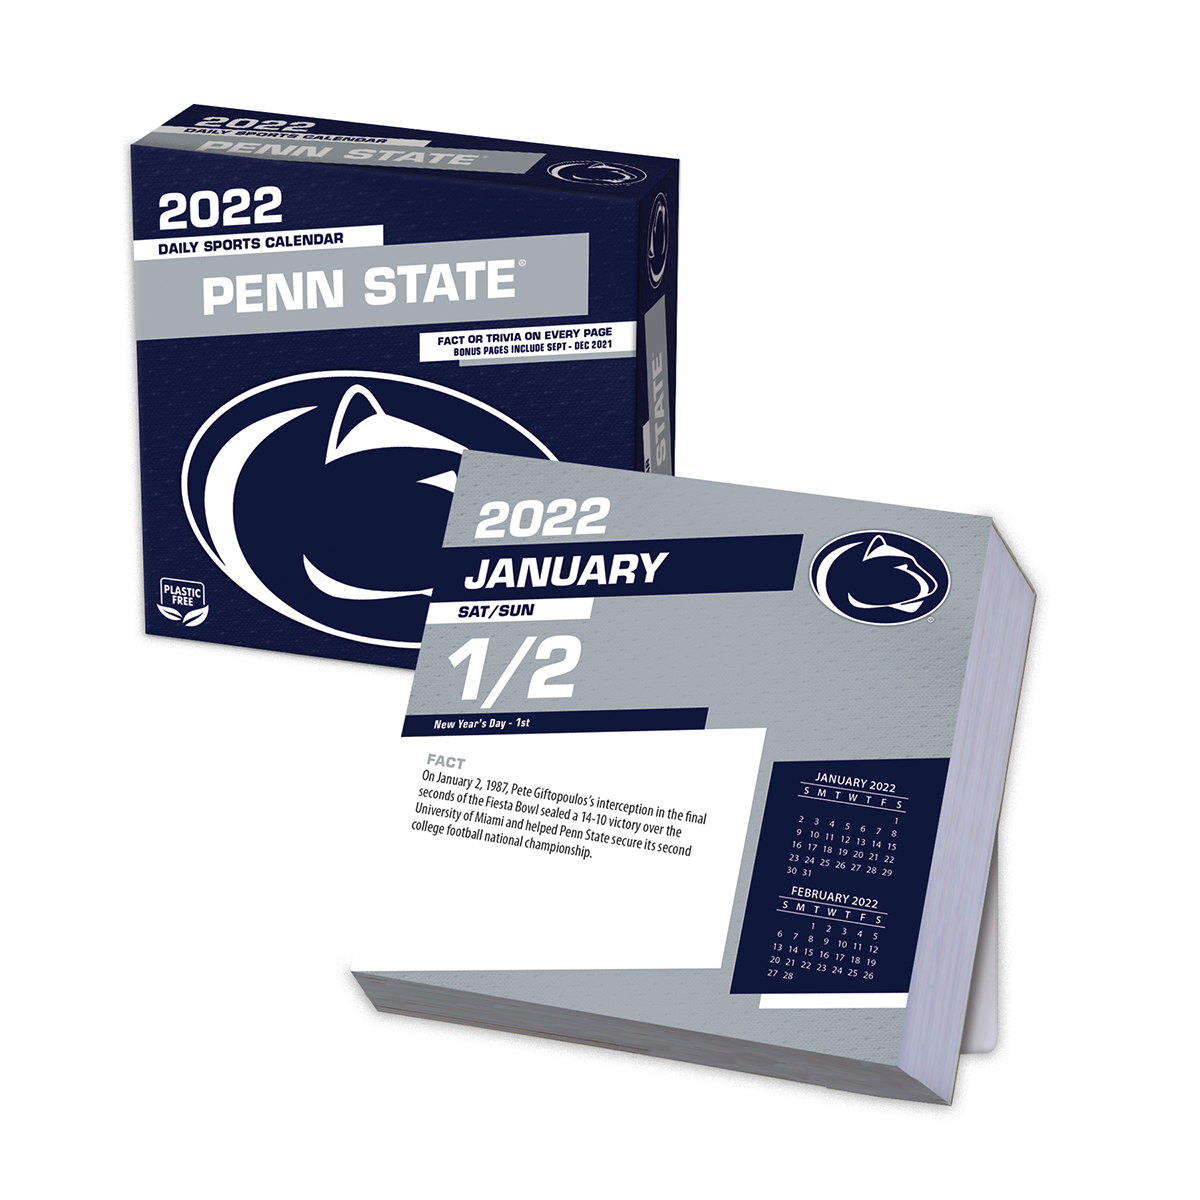 Penn State 2022 Calendar Penn State Nittany Lions 2022 Page-A-Day Box Calendar - Buy At Khc Sports